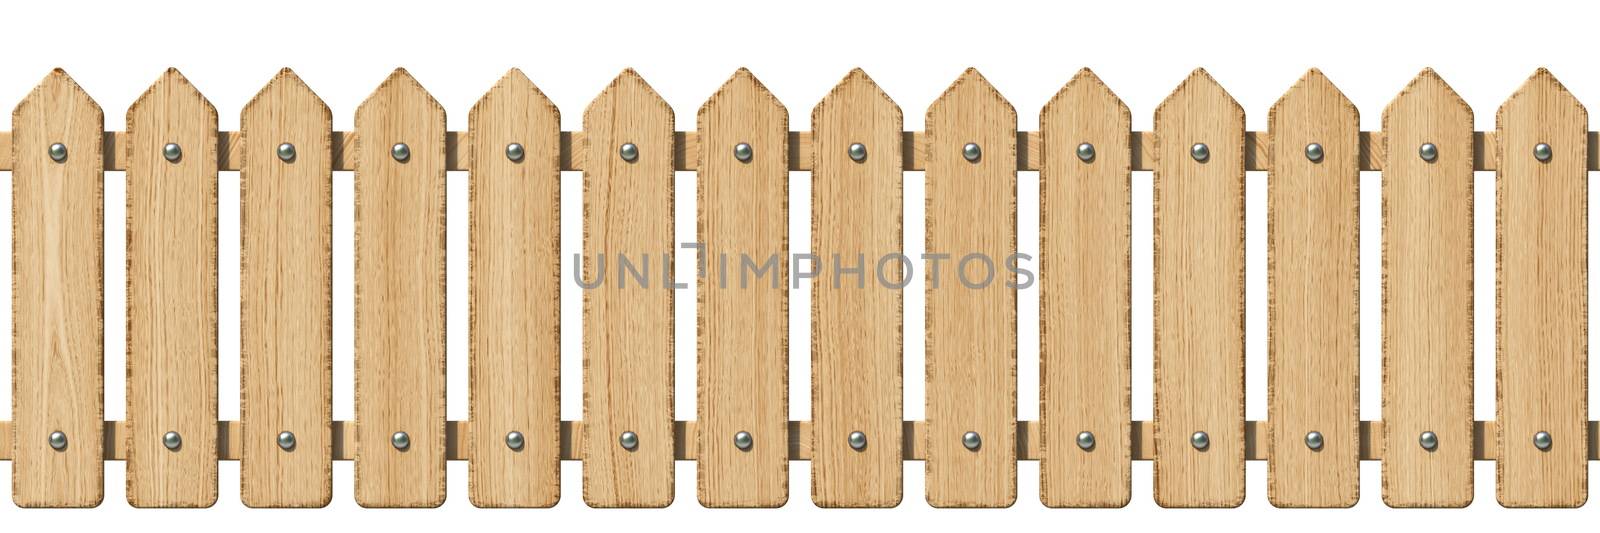 Wooden fence 3D by djmilic